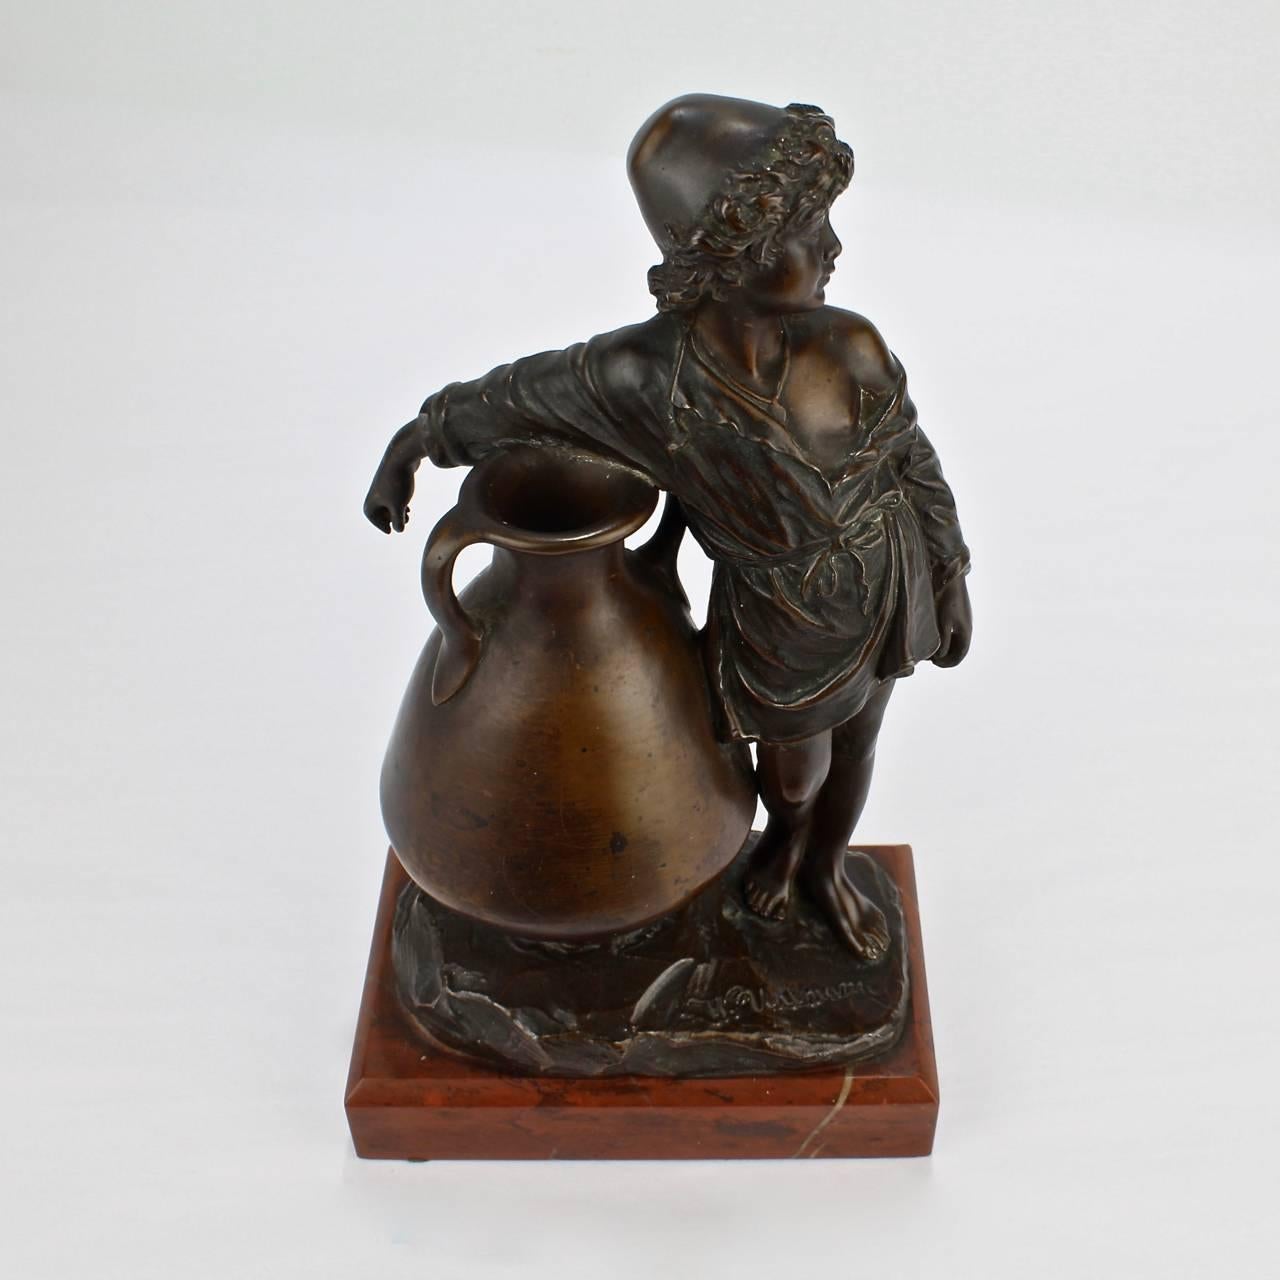 Revival Antique German Orientalist Bronze Sculpture of a Young Boy with Urn by Uhlmann For Sale